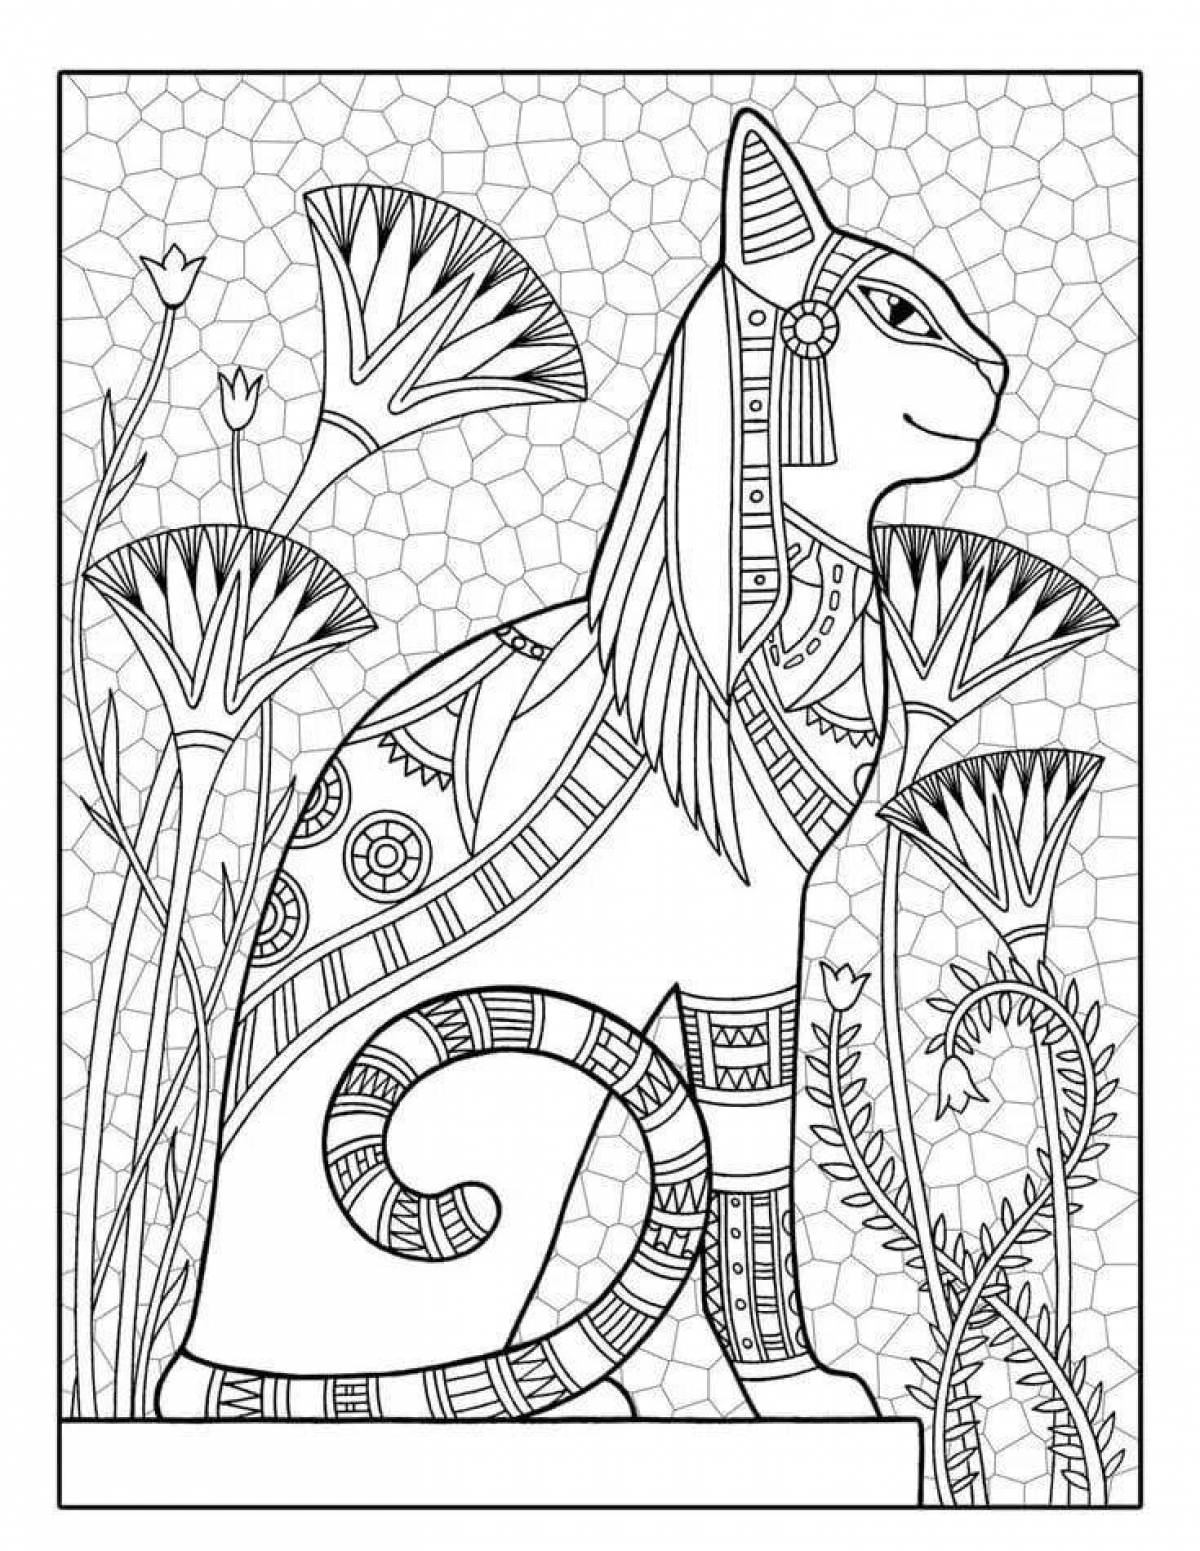 Incredible Egyptian cat coloring book